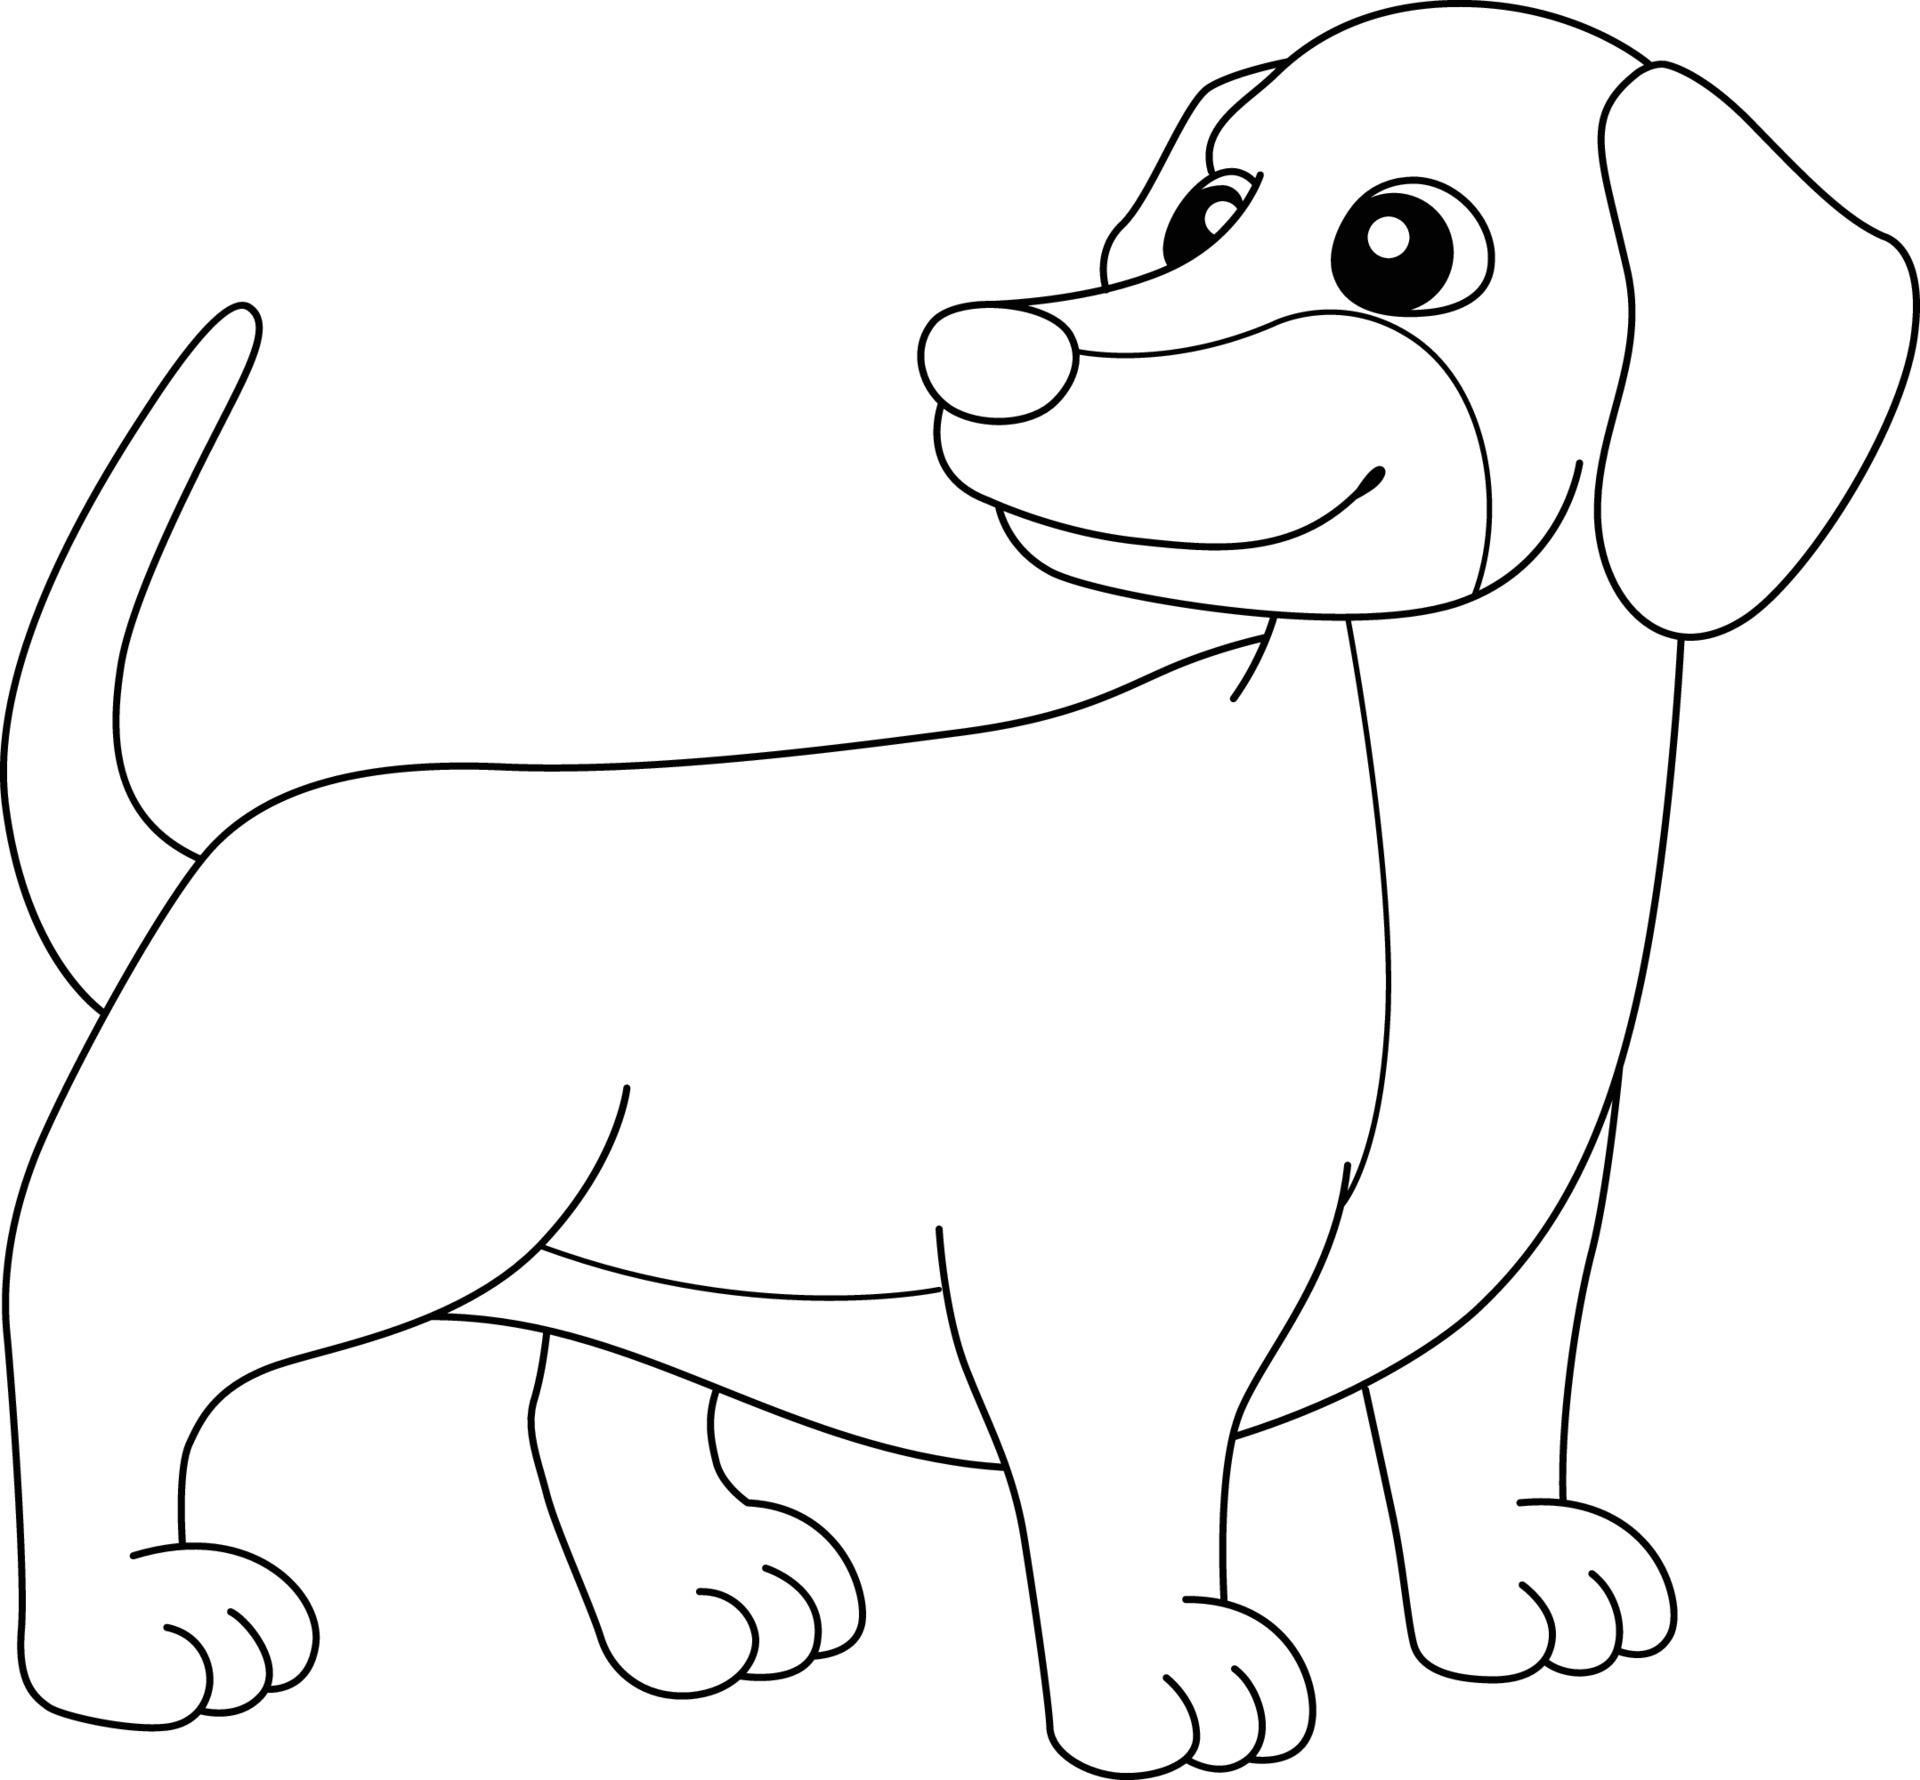 Dachshund Dog Coloring Page Isolated for Kids 8208207 Vector Art at Vecteezy